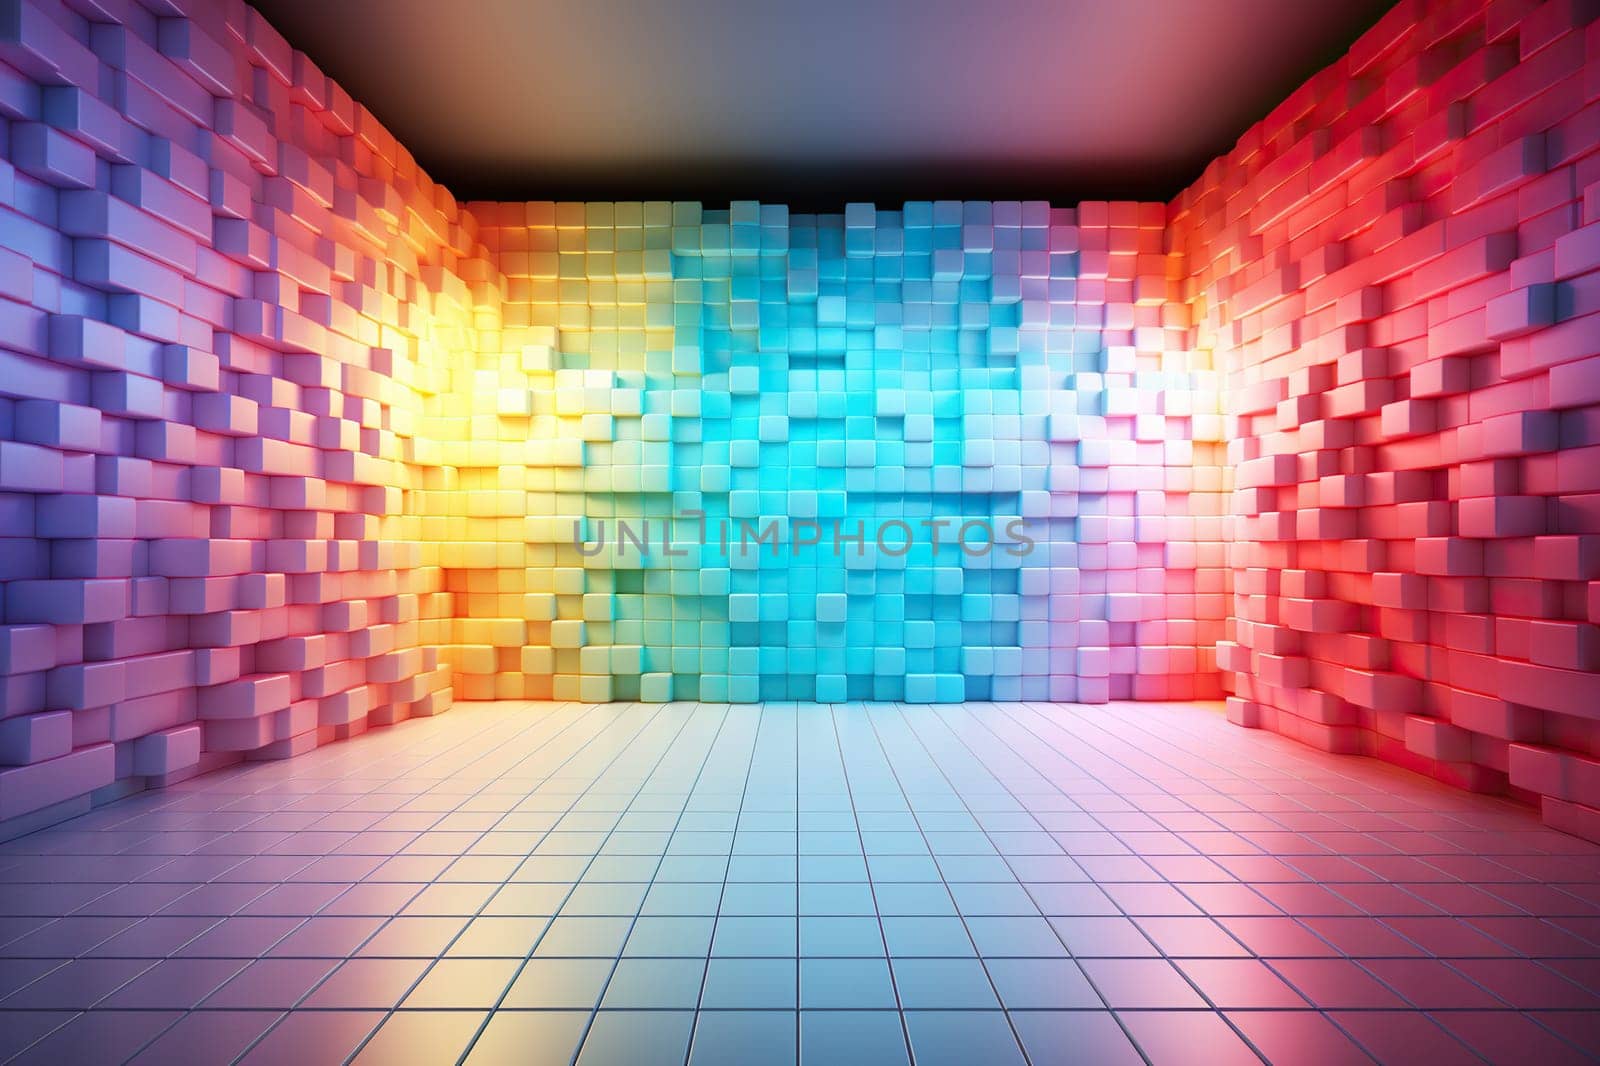 A room with colorful cubes on the walls.